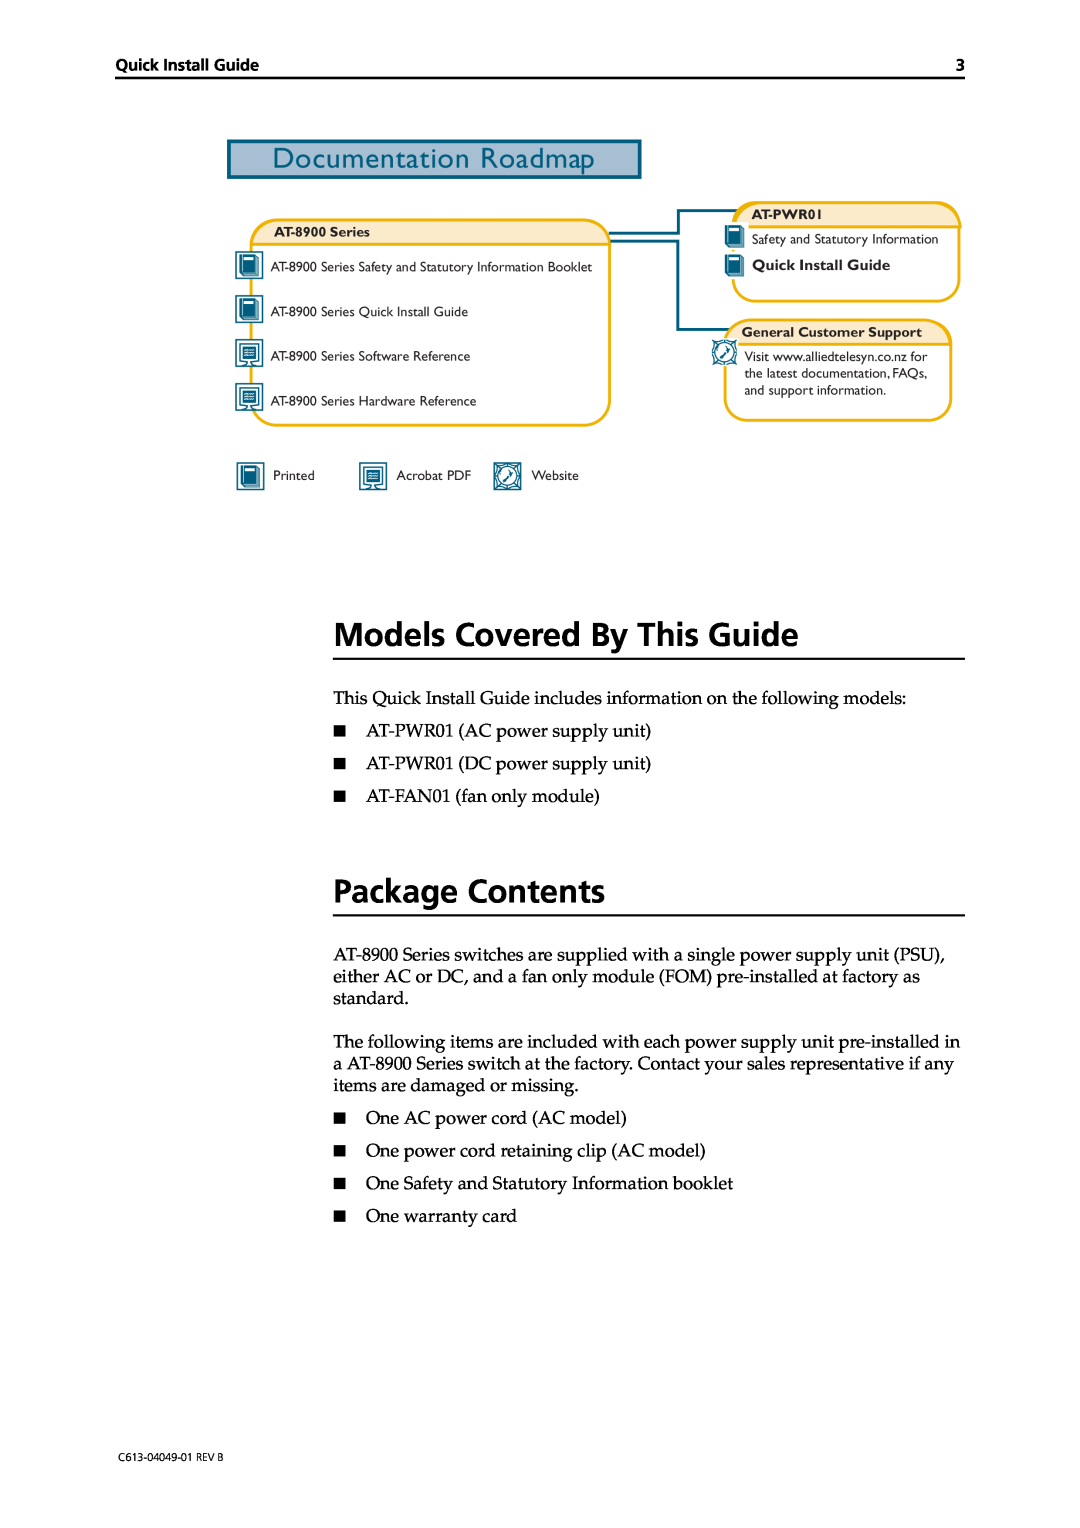 Allied Telesis AT-PWR01 manual Models Covered By This Guide, Package Contents, Documentation Roadmap 